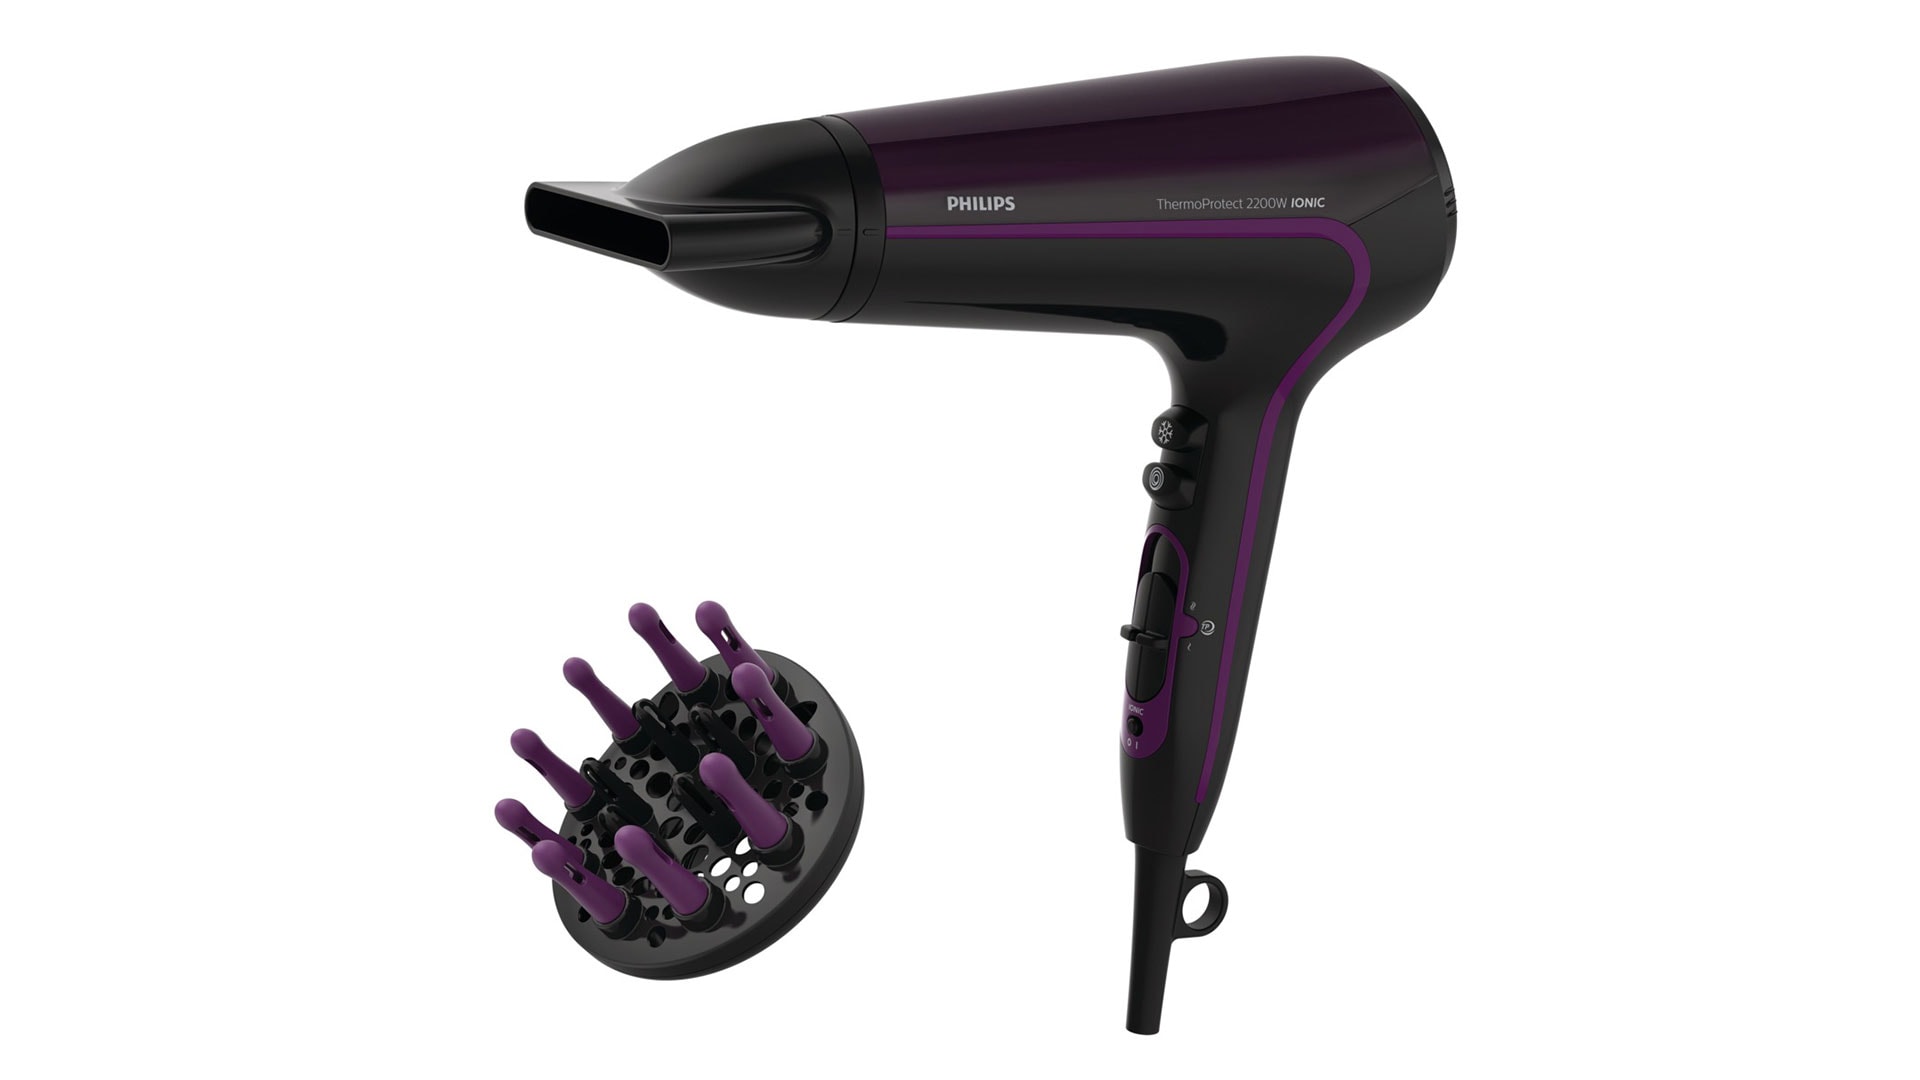 Download image (.jpg) Philips DryCare Advanced Hairdryer (opens in a new window)